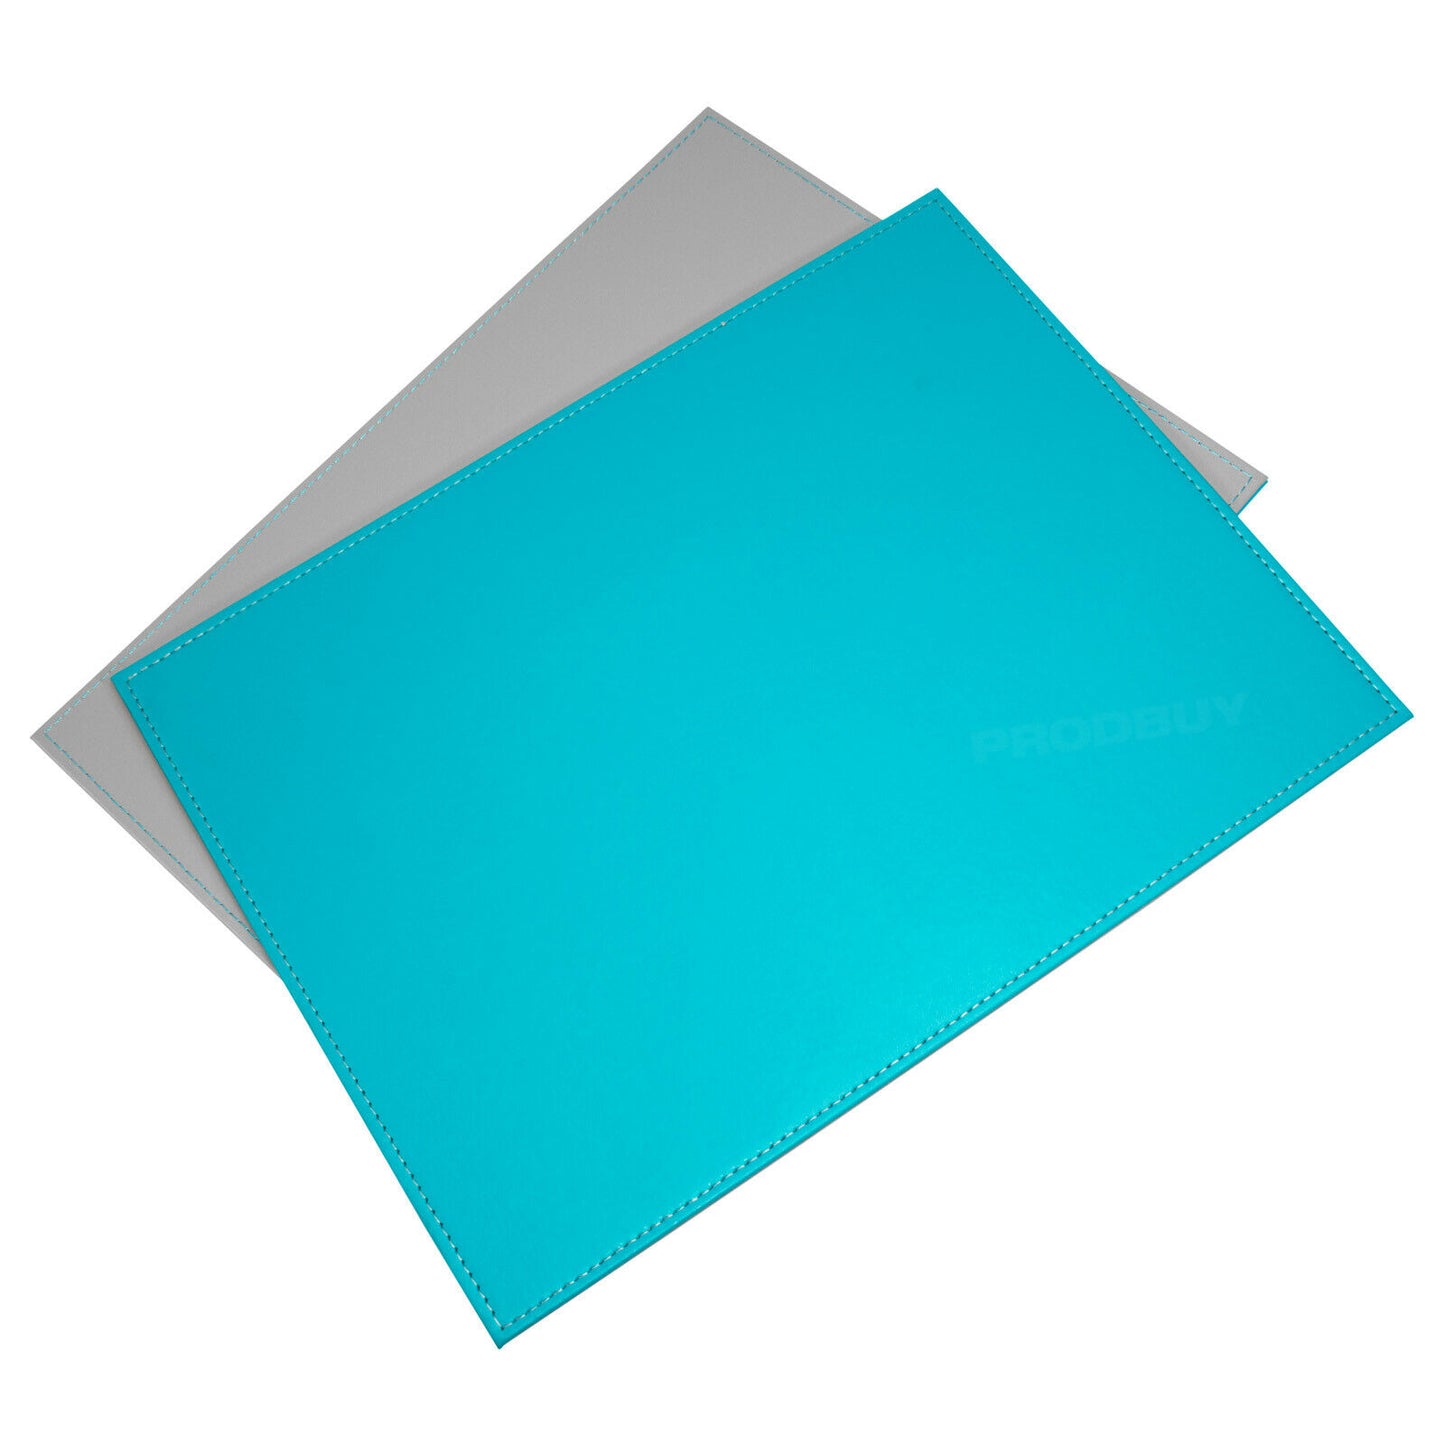 Freeform Reversible Placemats Turquoise Grey 40cm Large Faux Leather